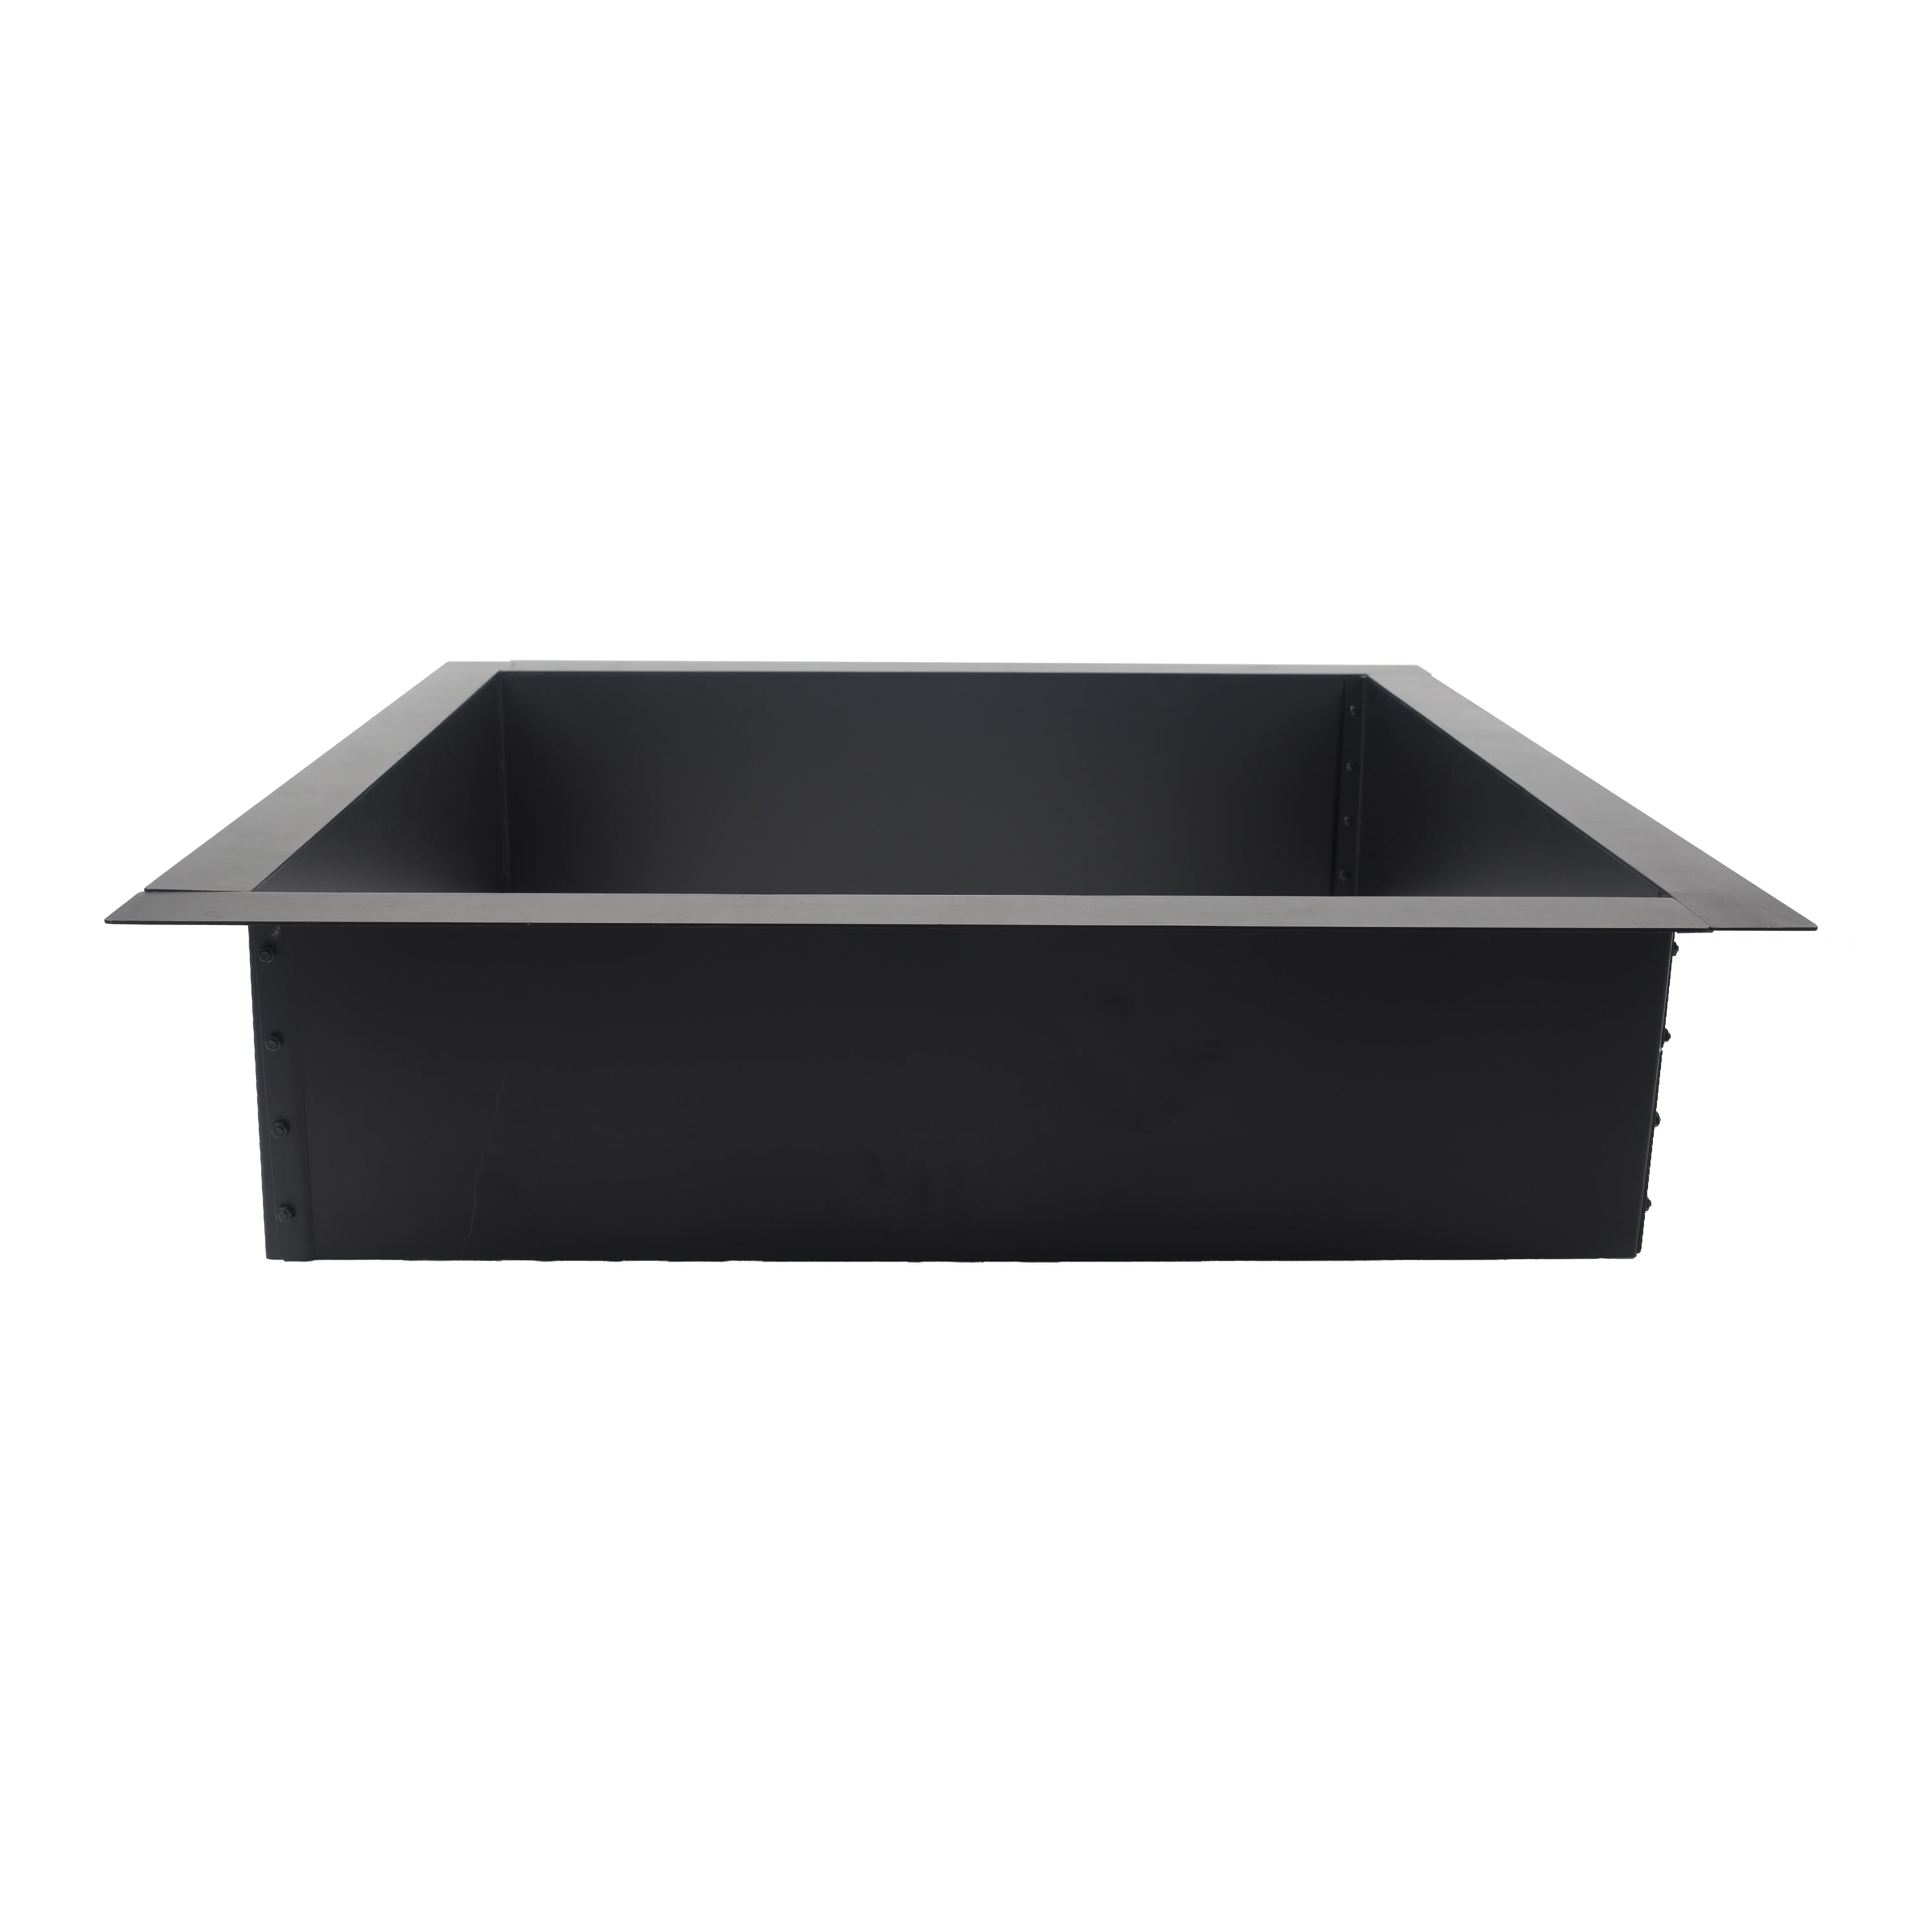 Black Square Outdoor Fire Ring, Metal Fire Pit Insert